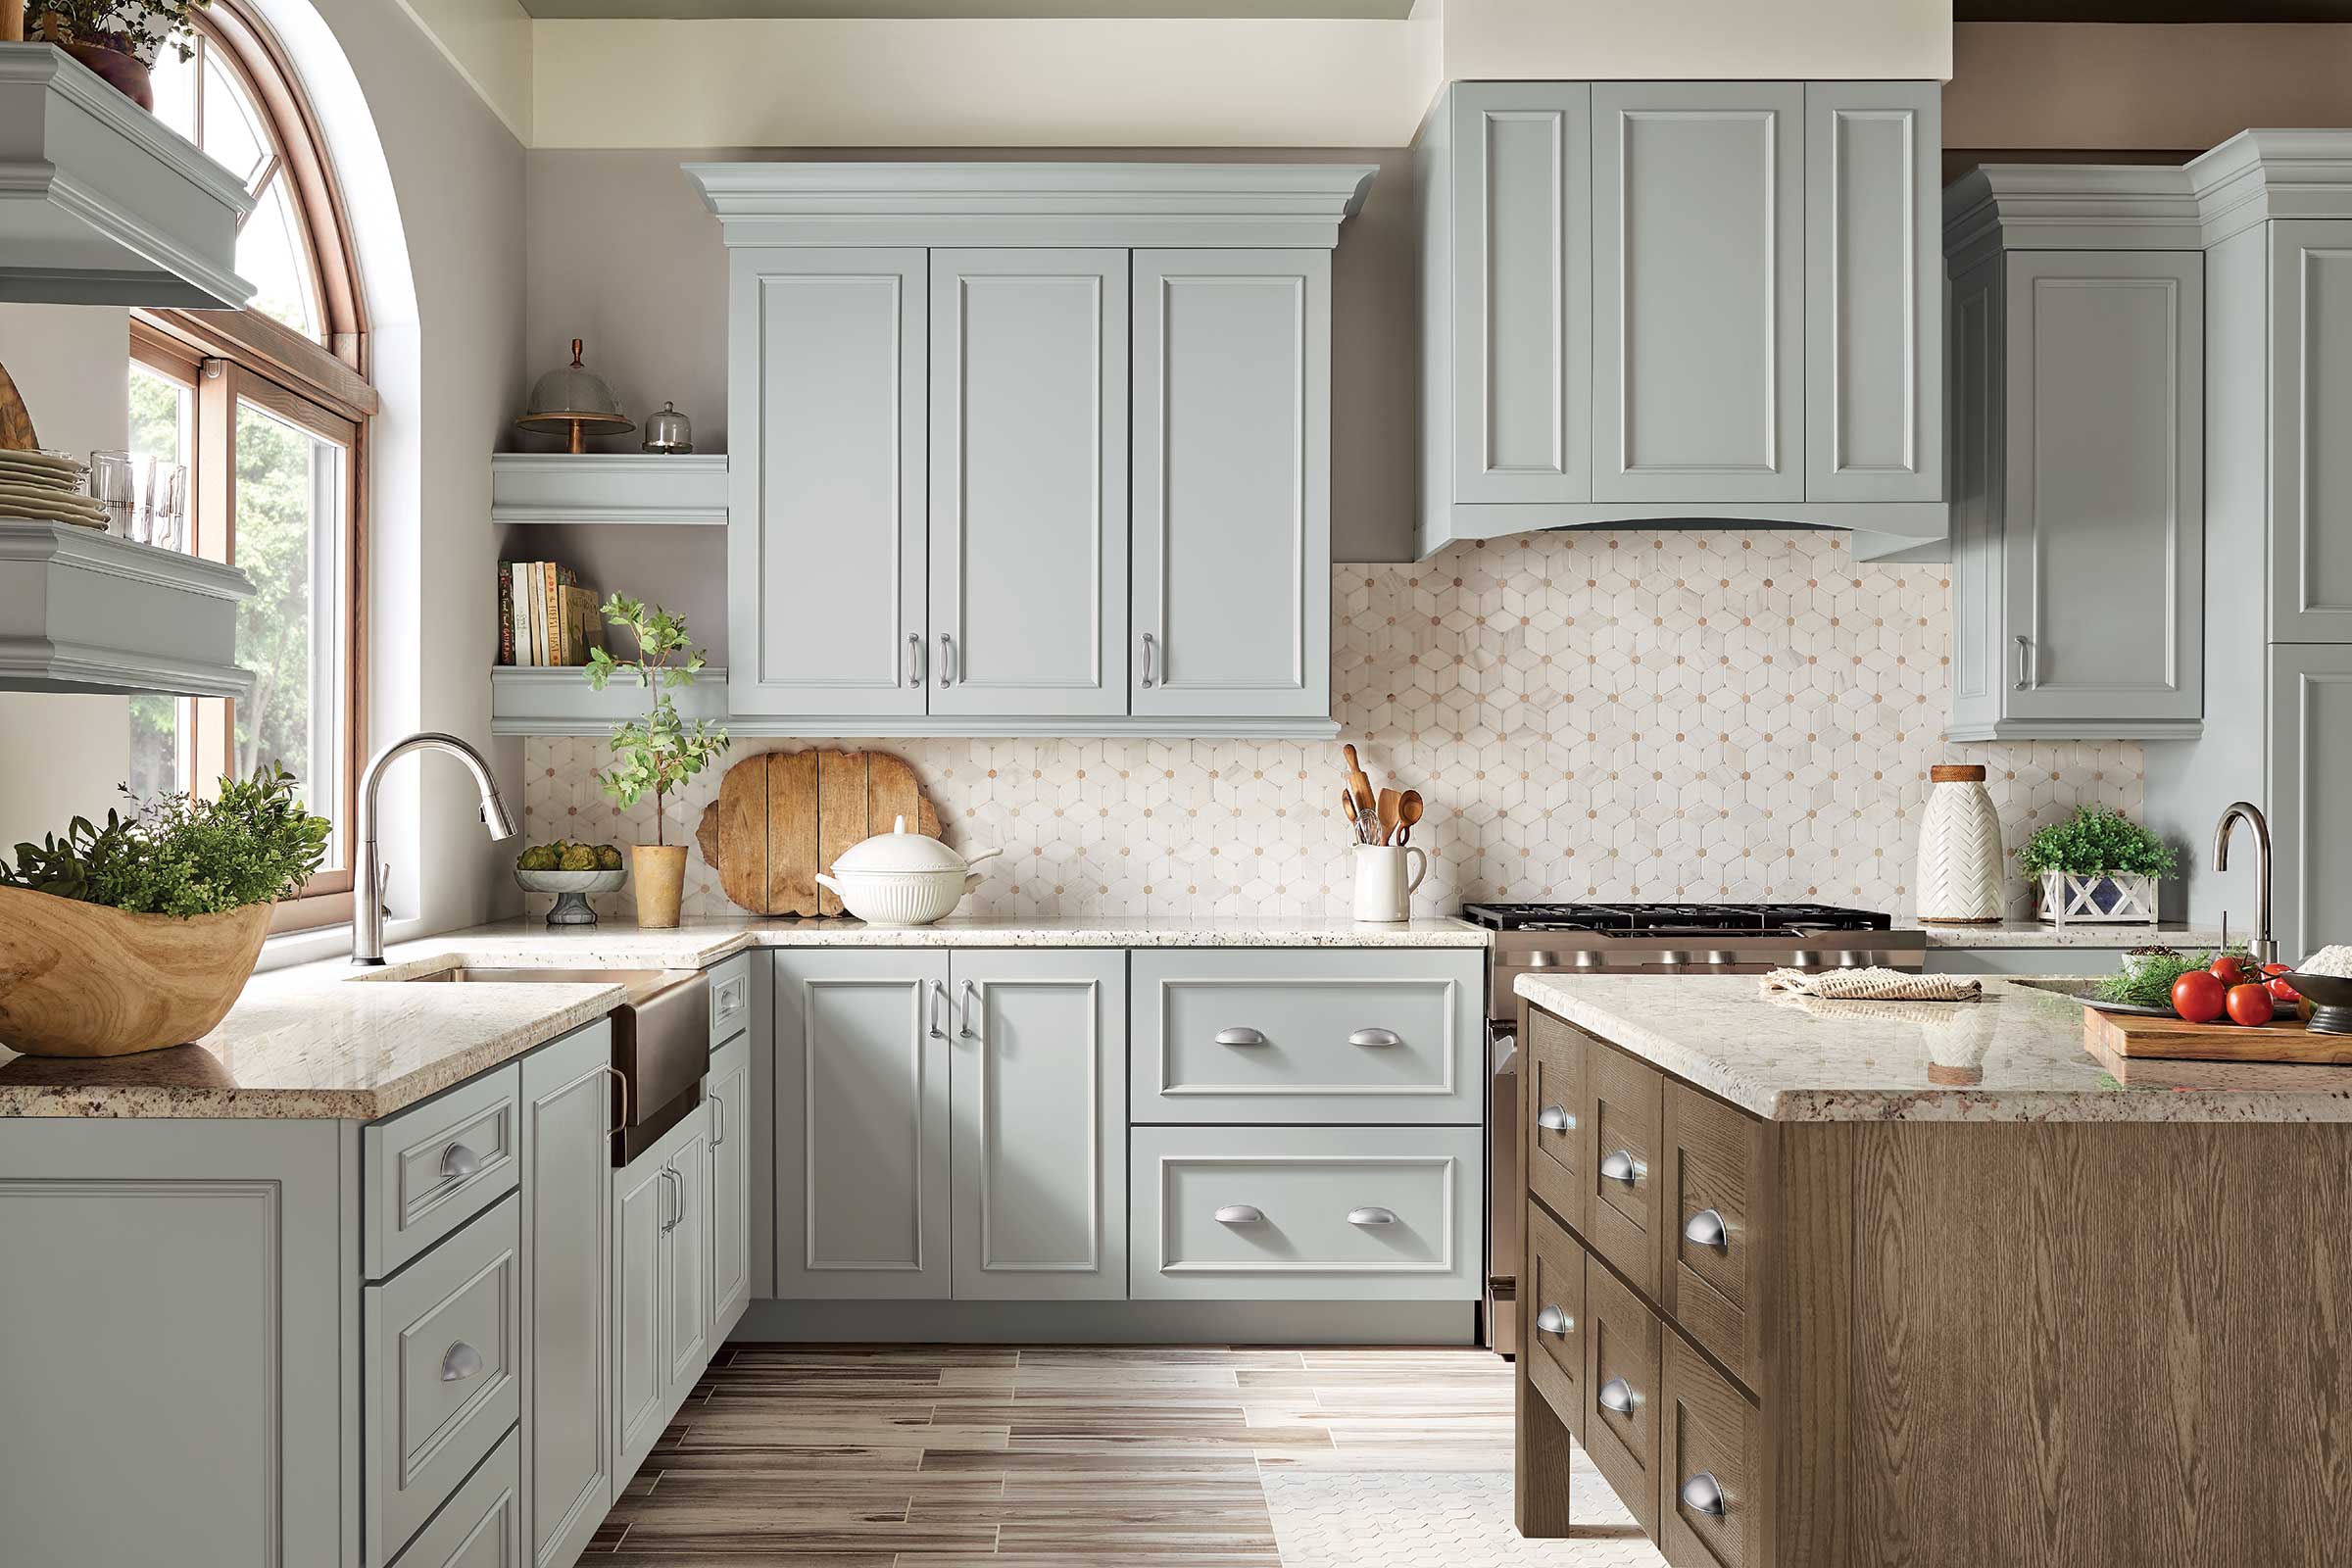 Kitchen Color Schemes, How To Choose The Right Color For Kitchen Countertops